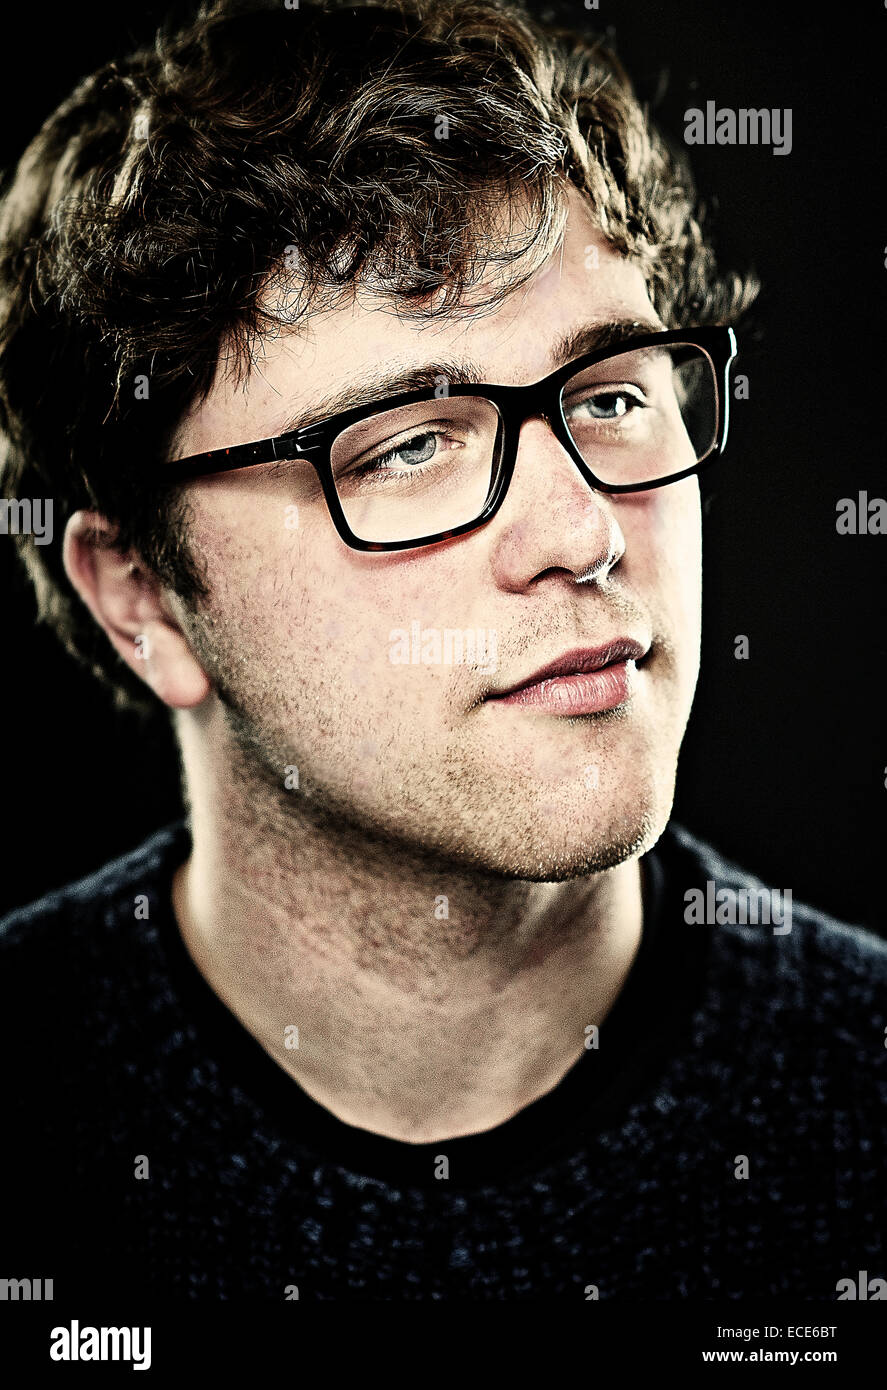 A white European male teenager age 19 wearing glasses. The image is a portrait shot in a studio in color. Stock Photo